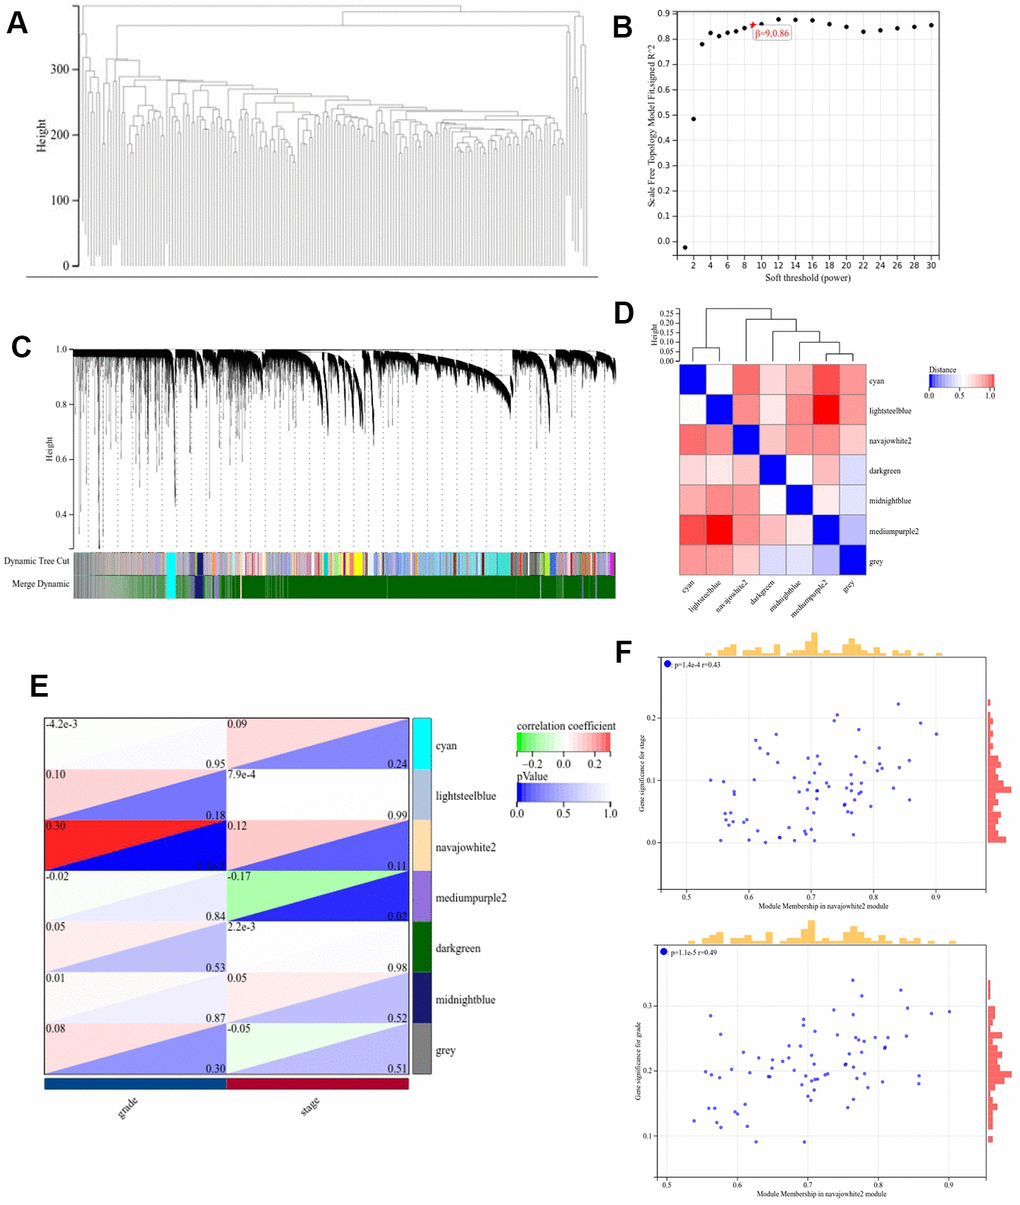 Construction of the WGCNA co-expression module. (A) Clustering dendrogram of the module feature genes. (B) Scale-free fit index analysis. (C) Clustering dendrogram of differentially expressed genes. (D) Network heatmap of modules. (E) Heat map demonstrating the correlation between the genes associated with module features and the staging and grading of pathology. (F) Scatterplot of module signature genes in the Navajowhite module.